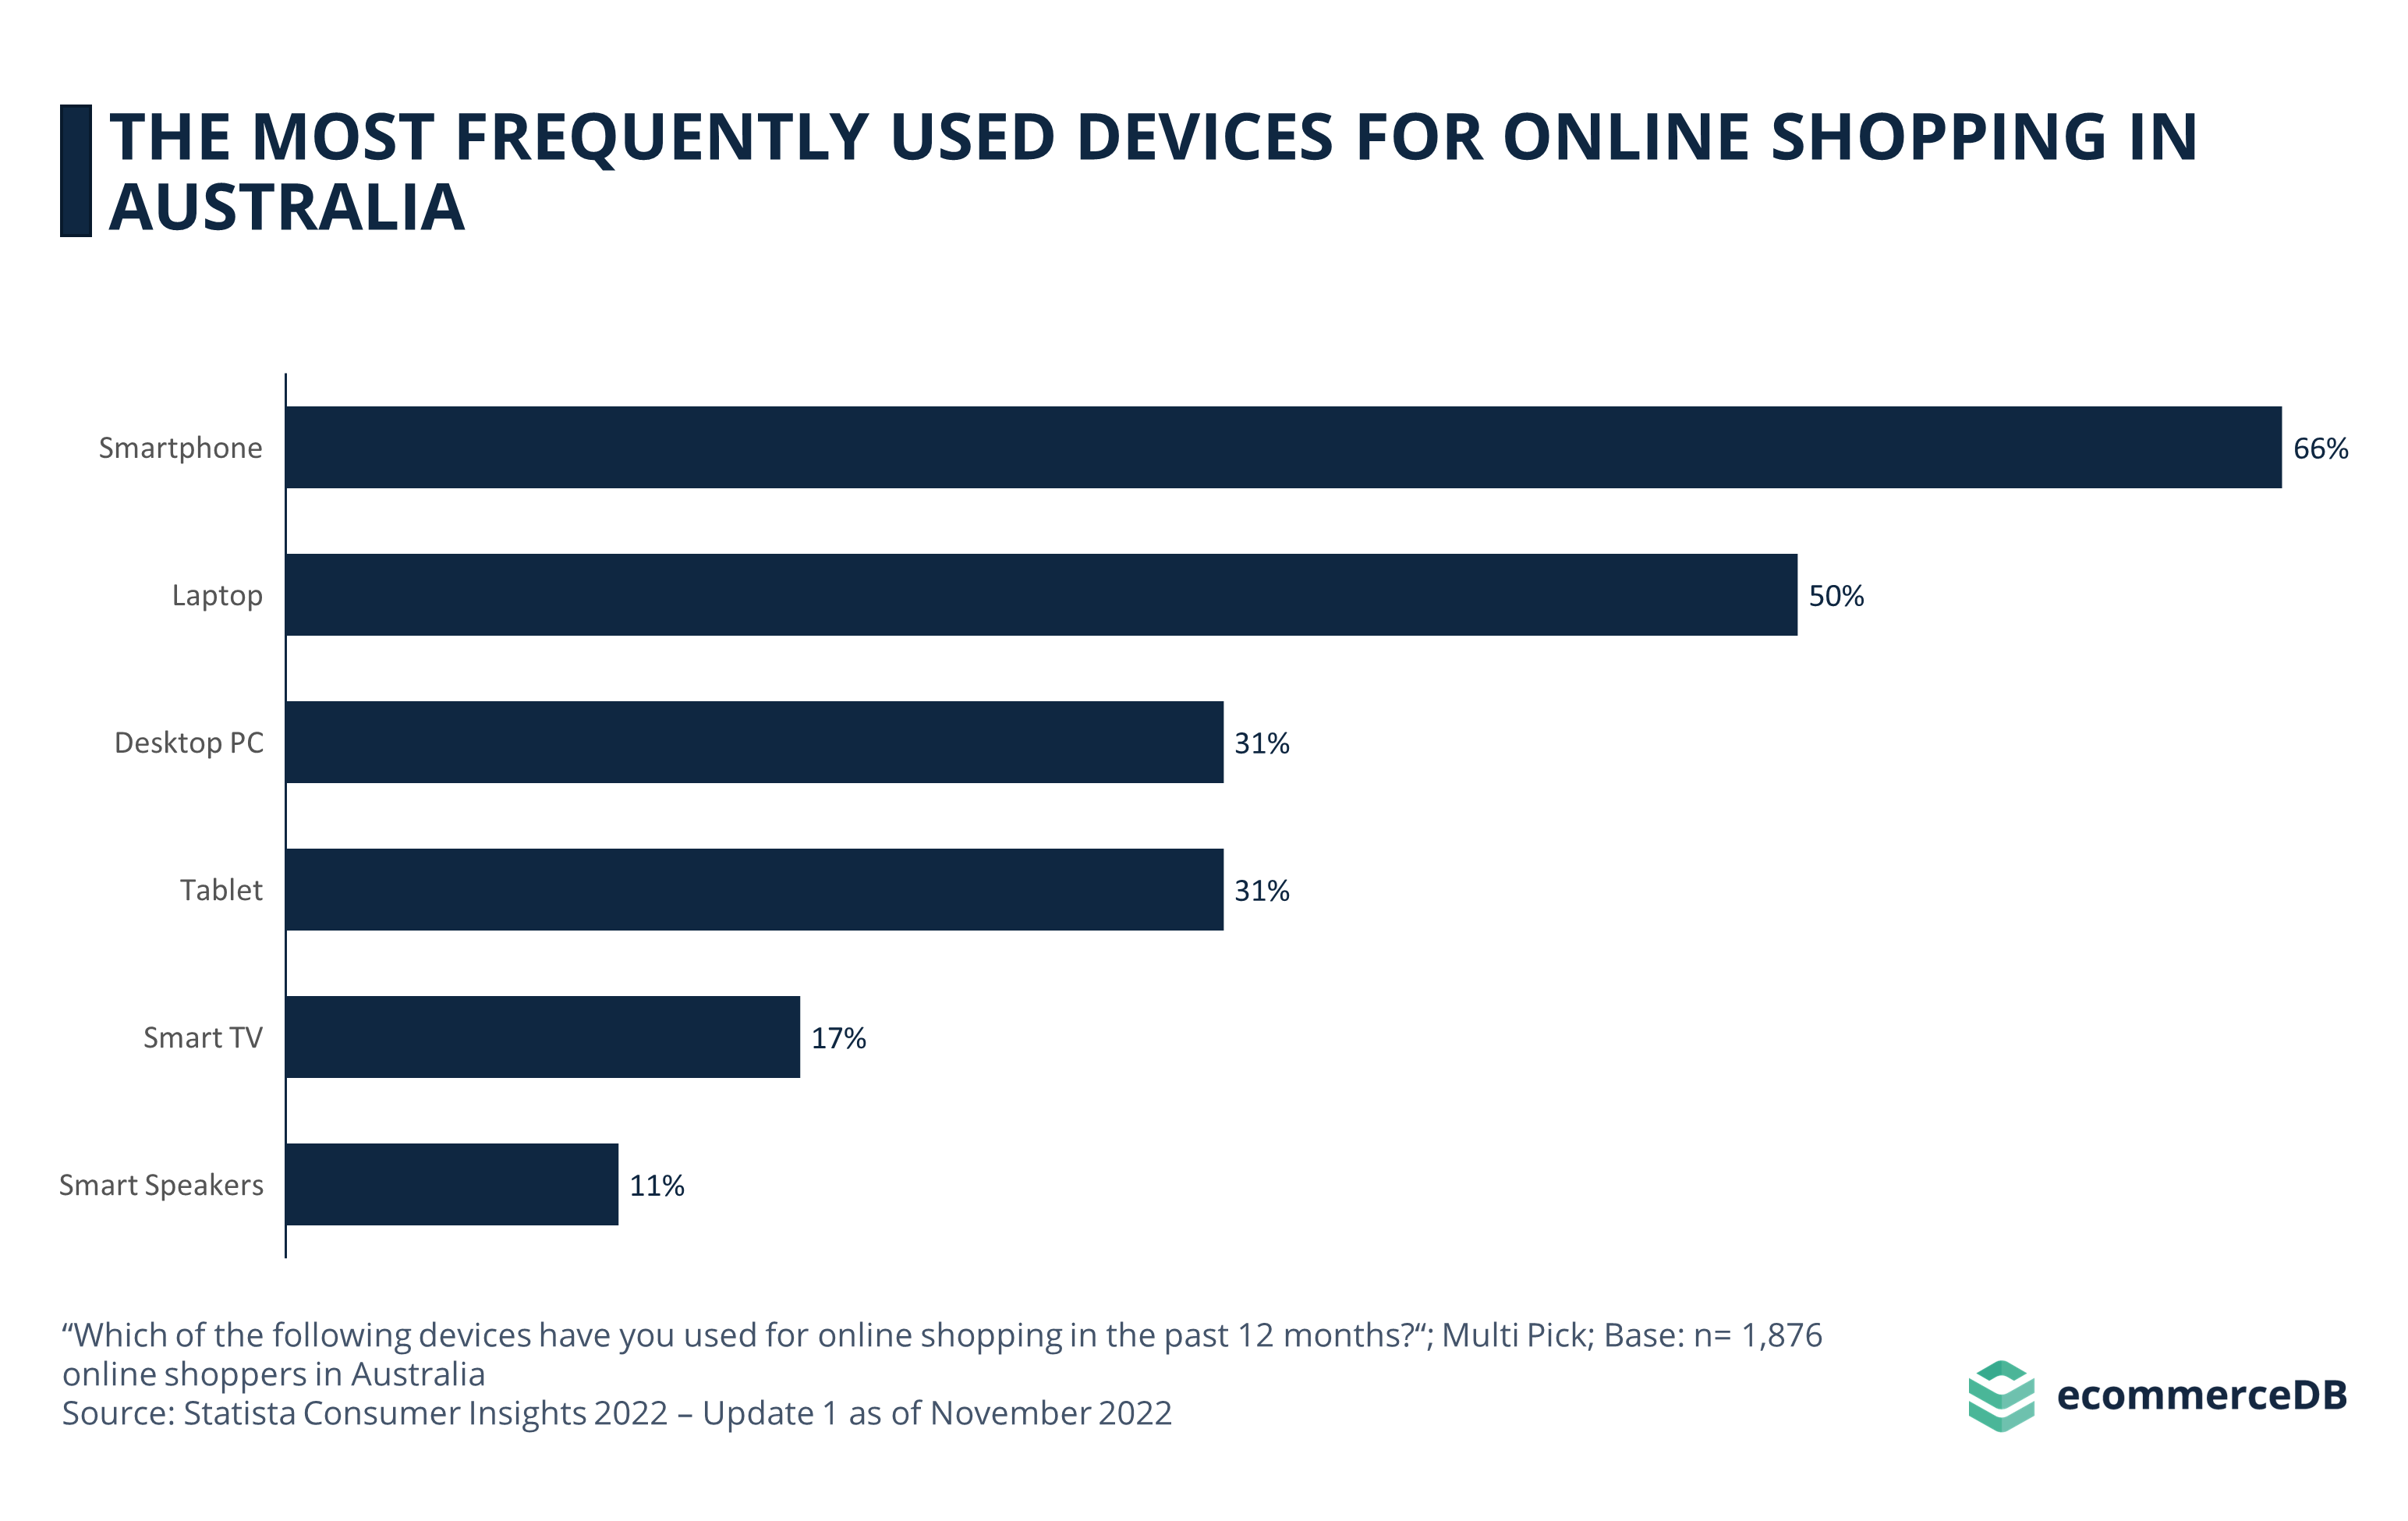 The Most Frequently Used Devices for Online Shopping in Australia